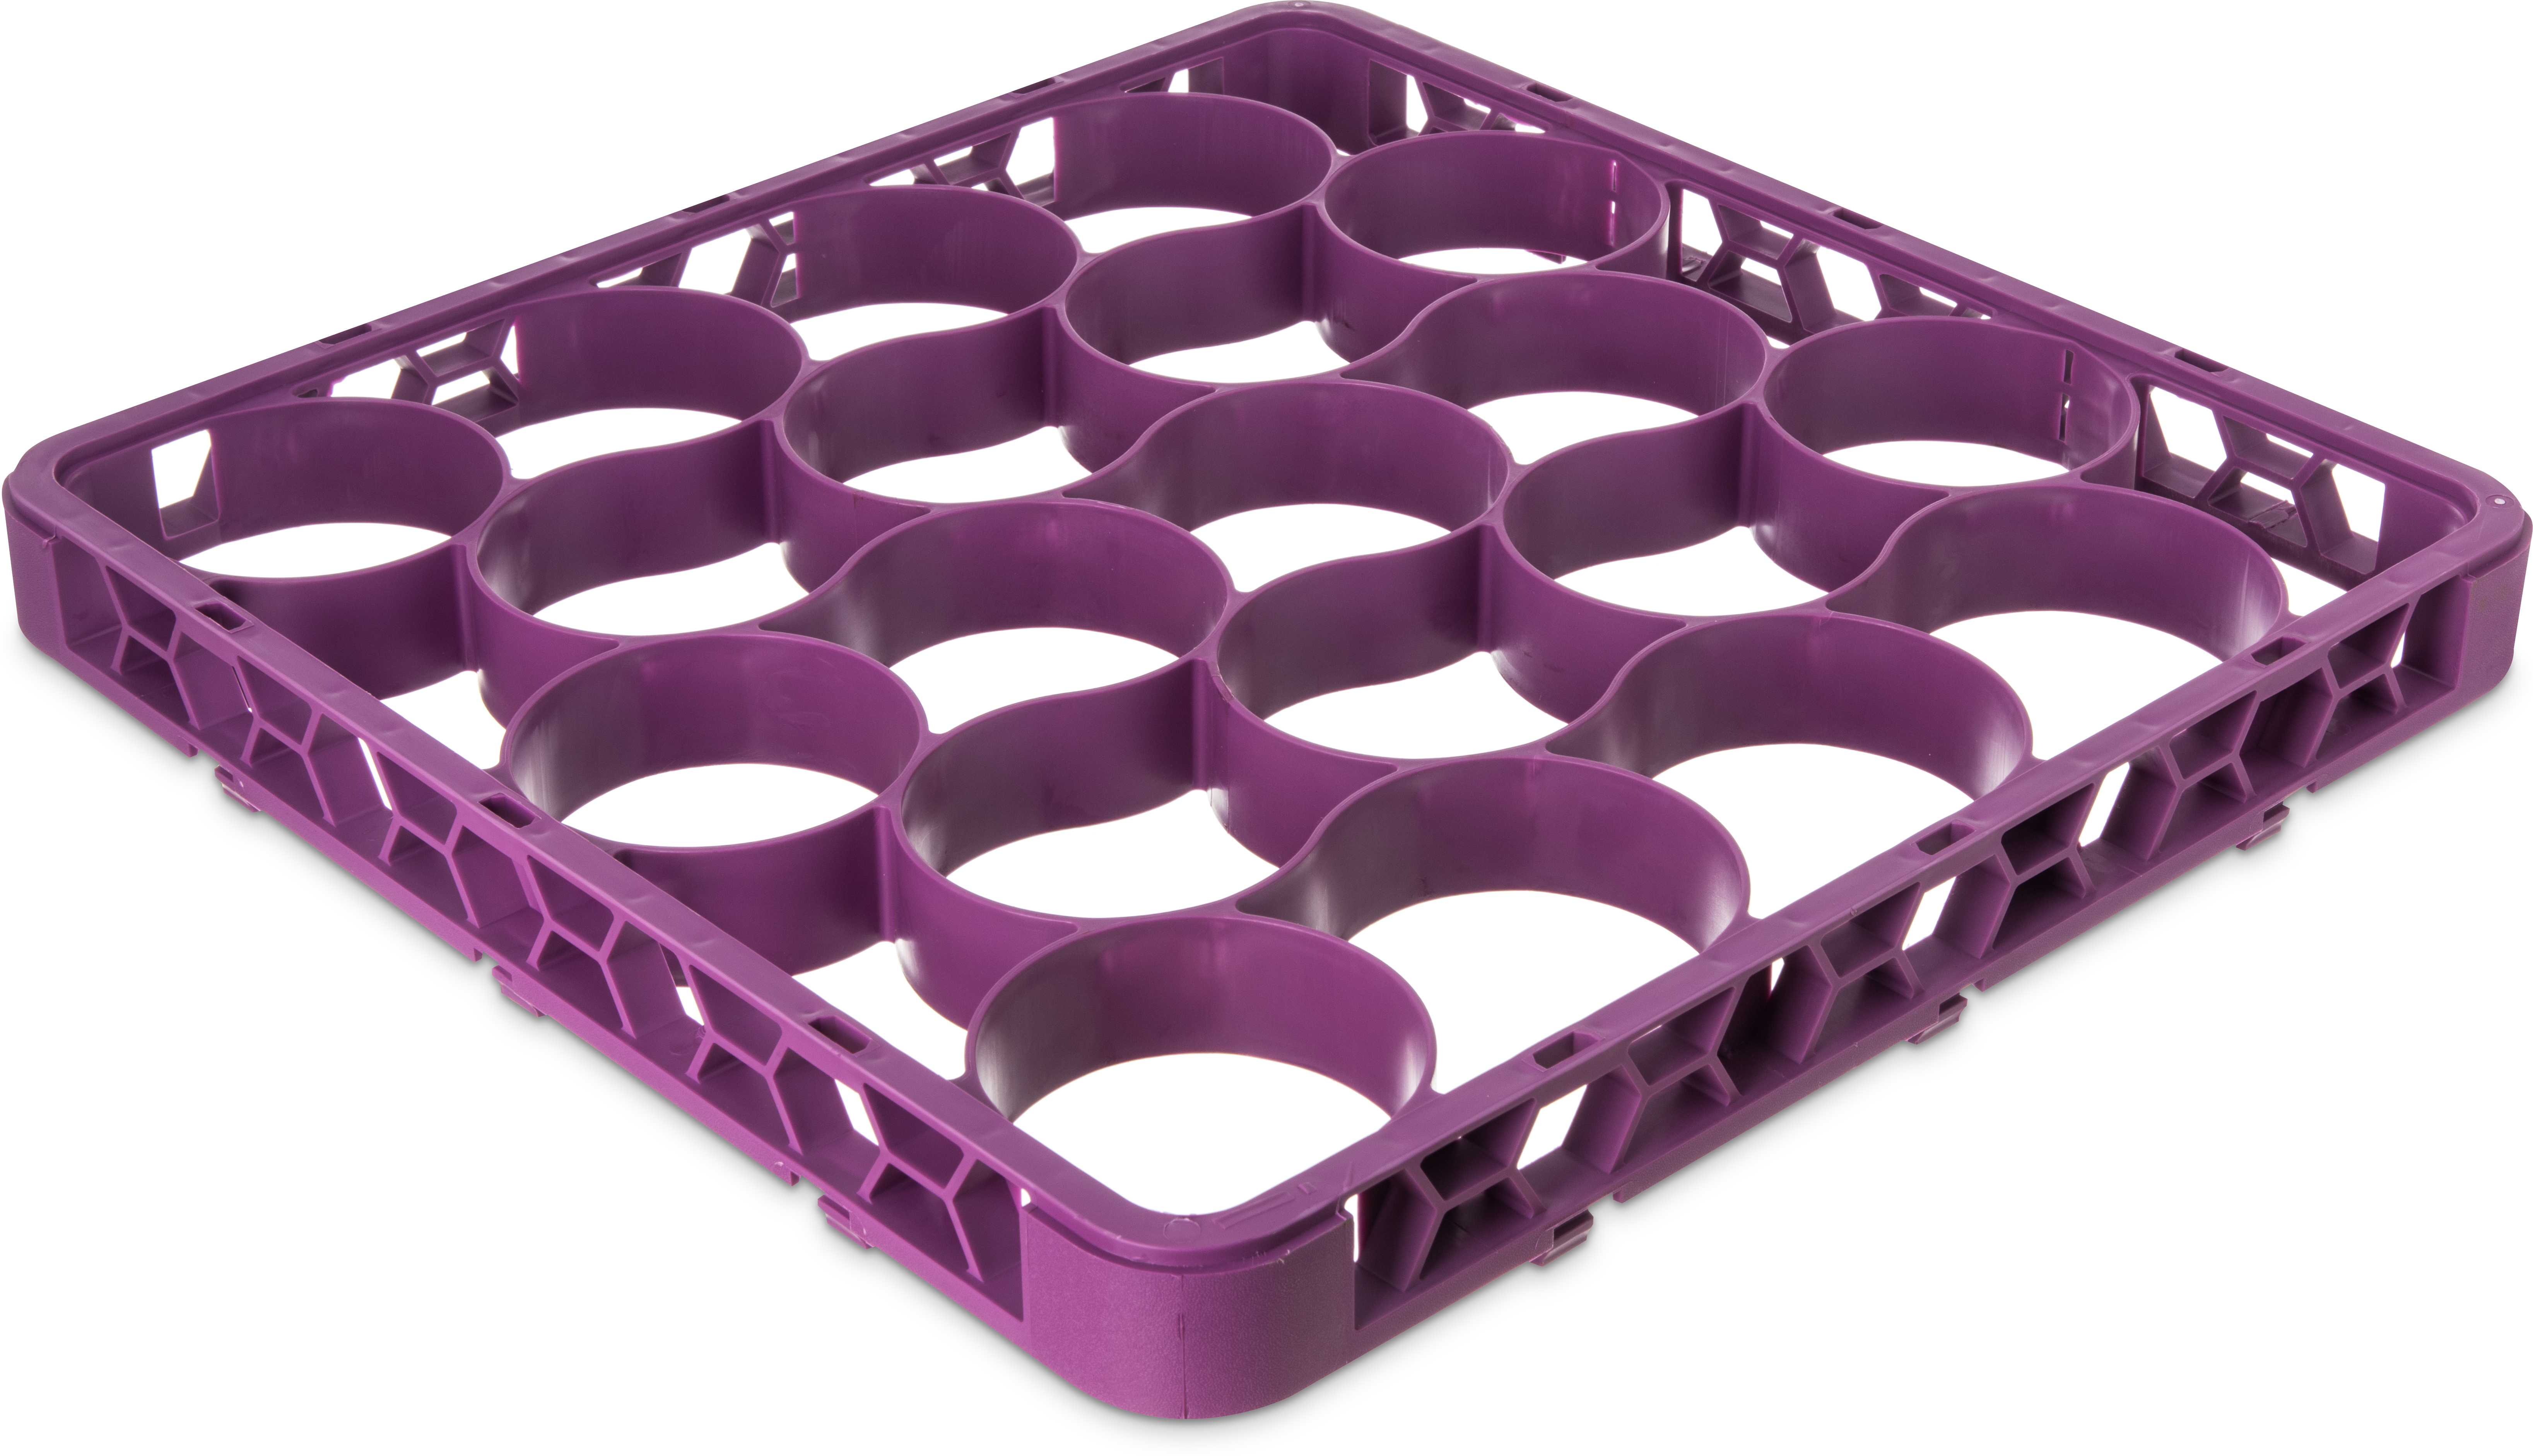 OptiClean NeWave Color-Coded Short Glass Rack Extender 20 Compartment - Lavender